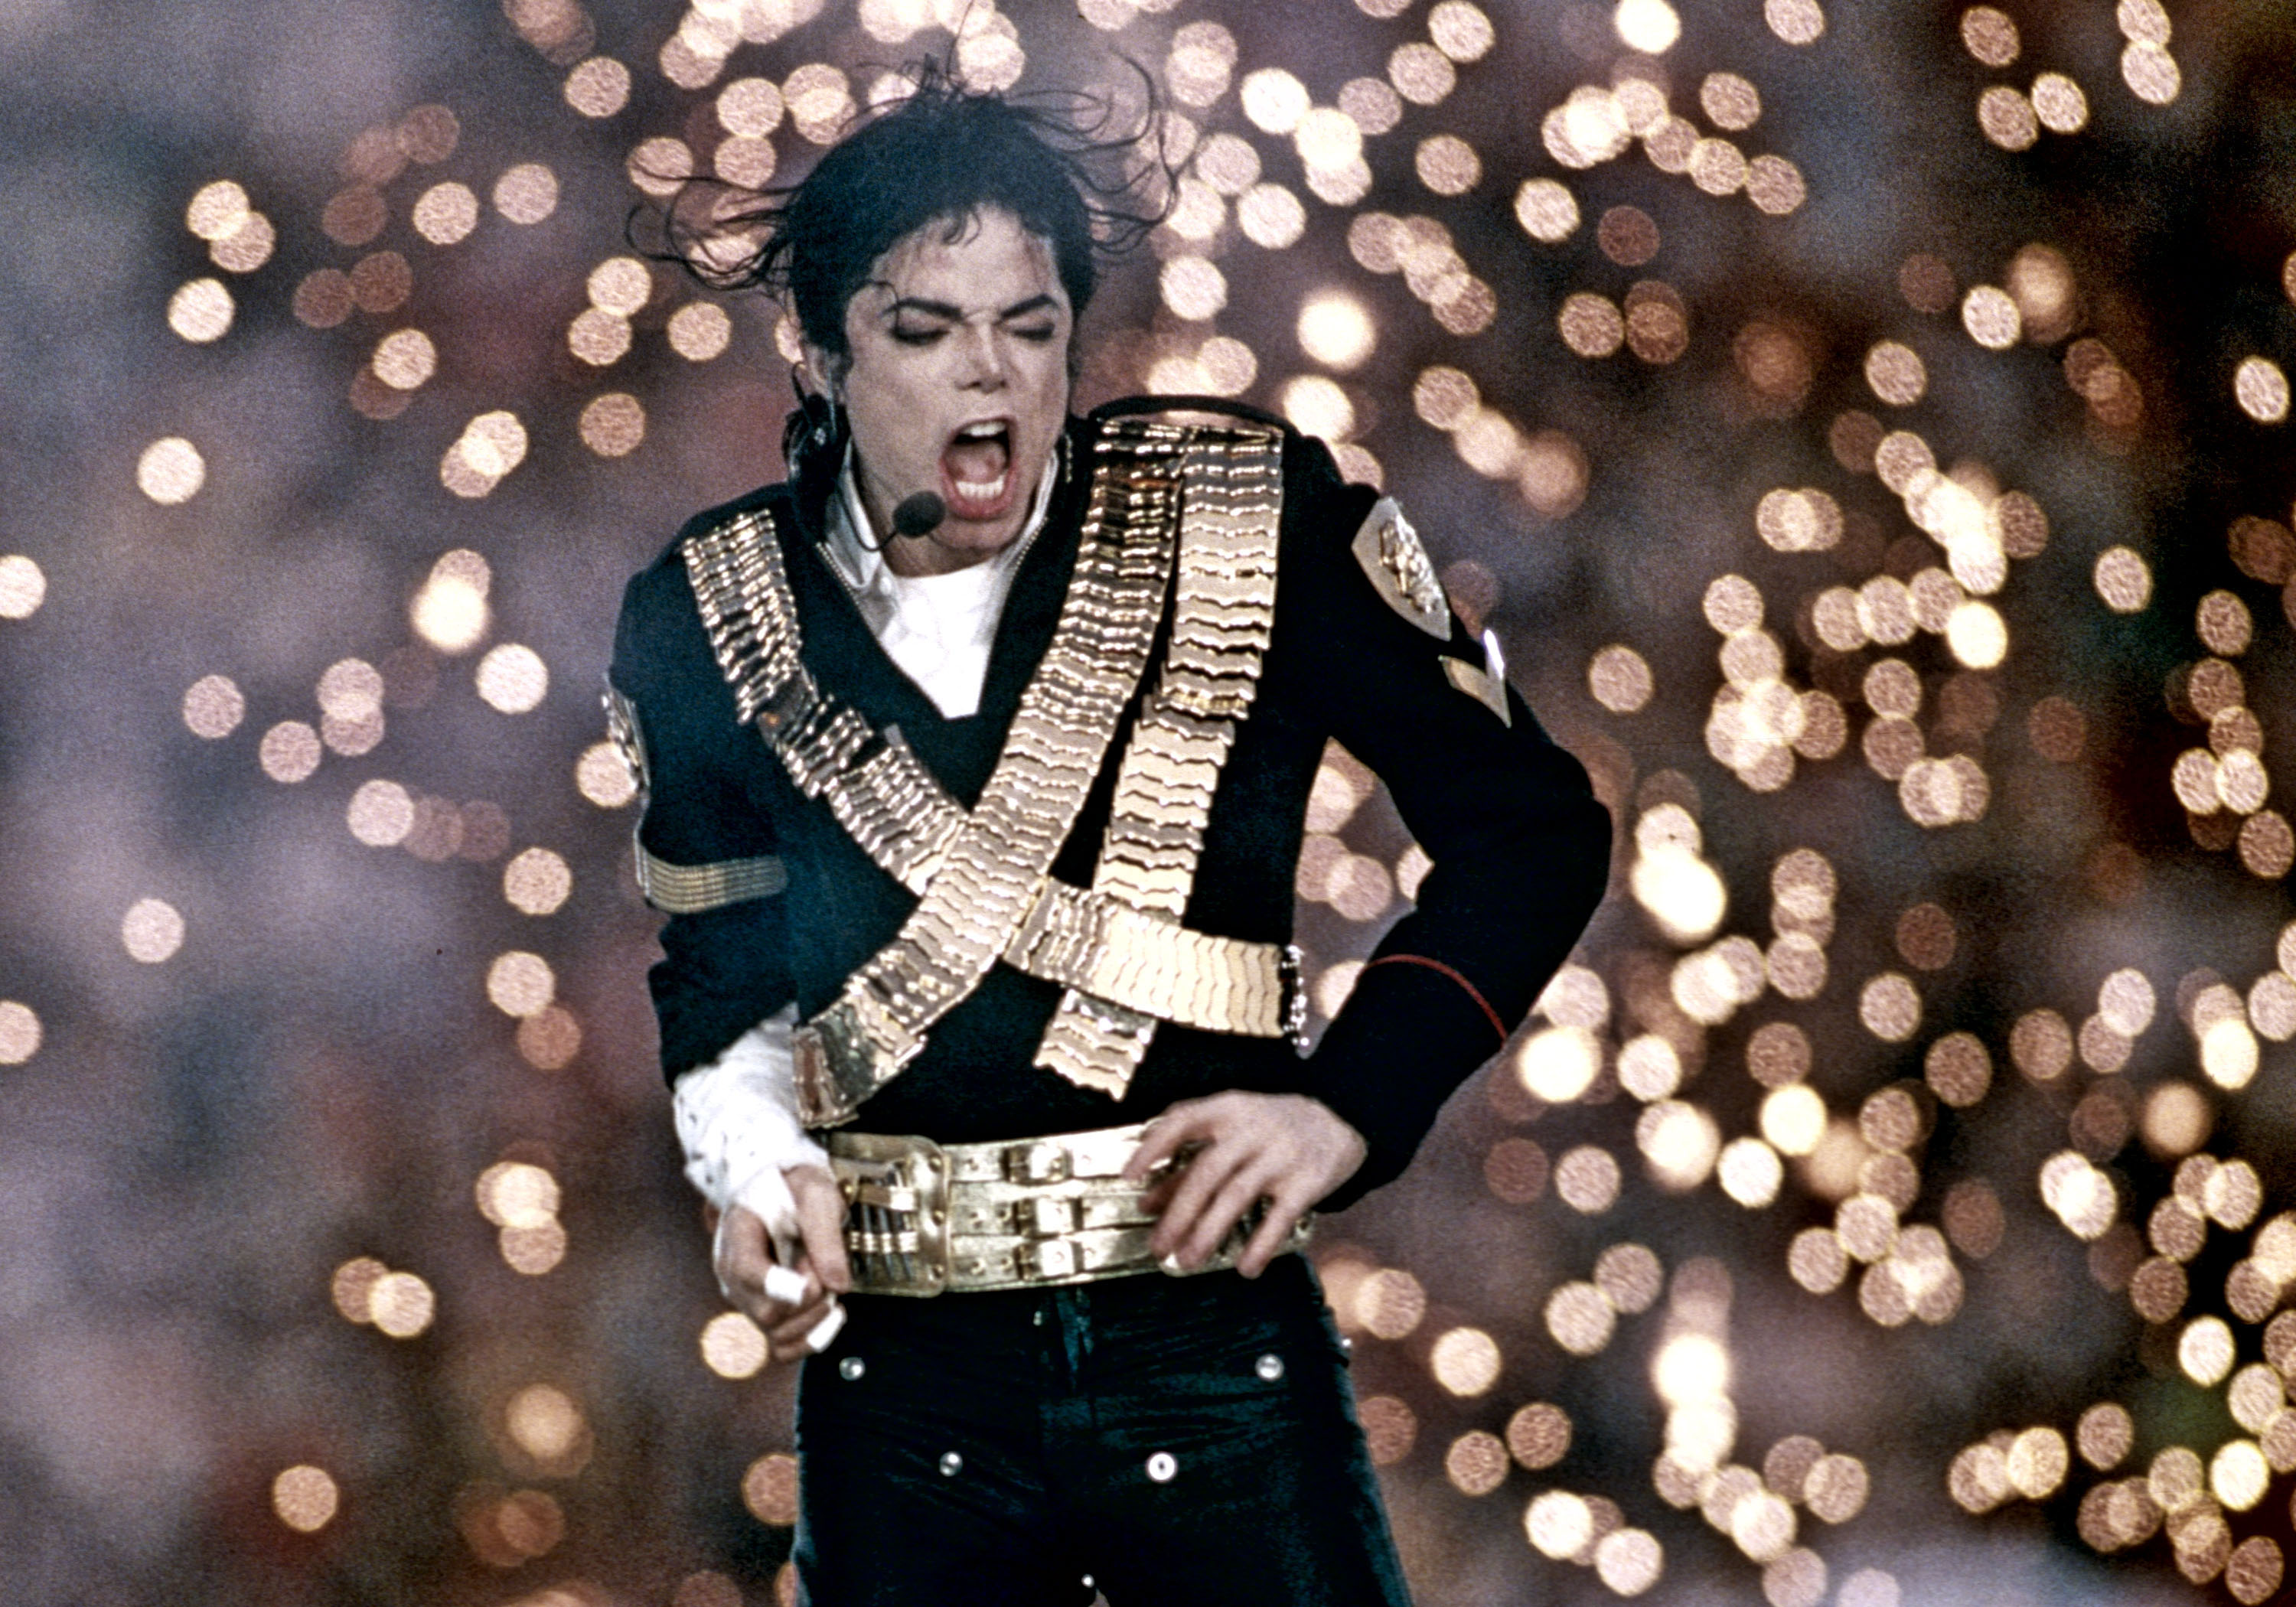 Michael Jackson-inspired gold bandolier was an especially nice touch.